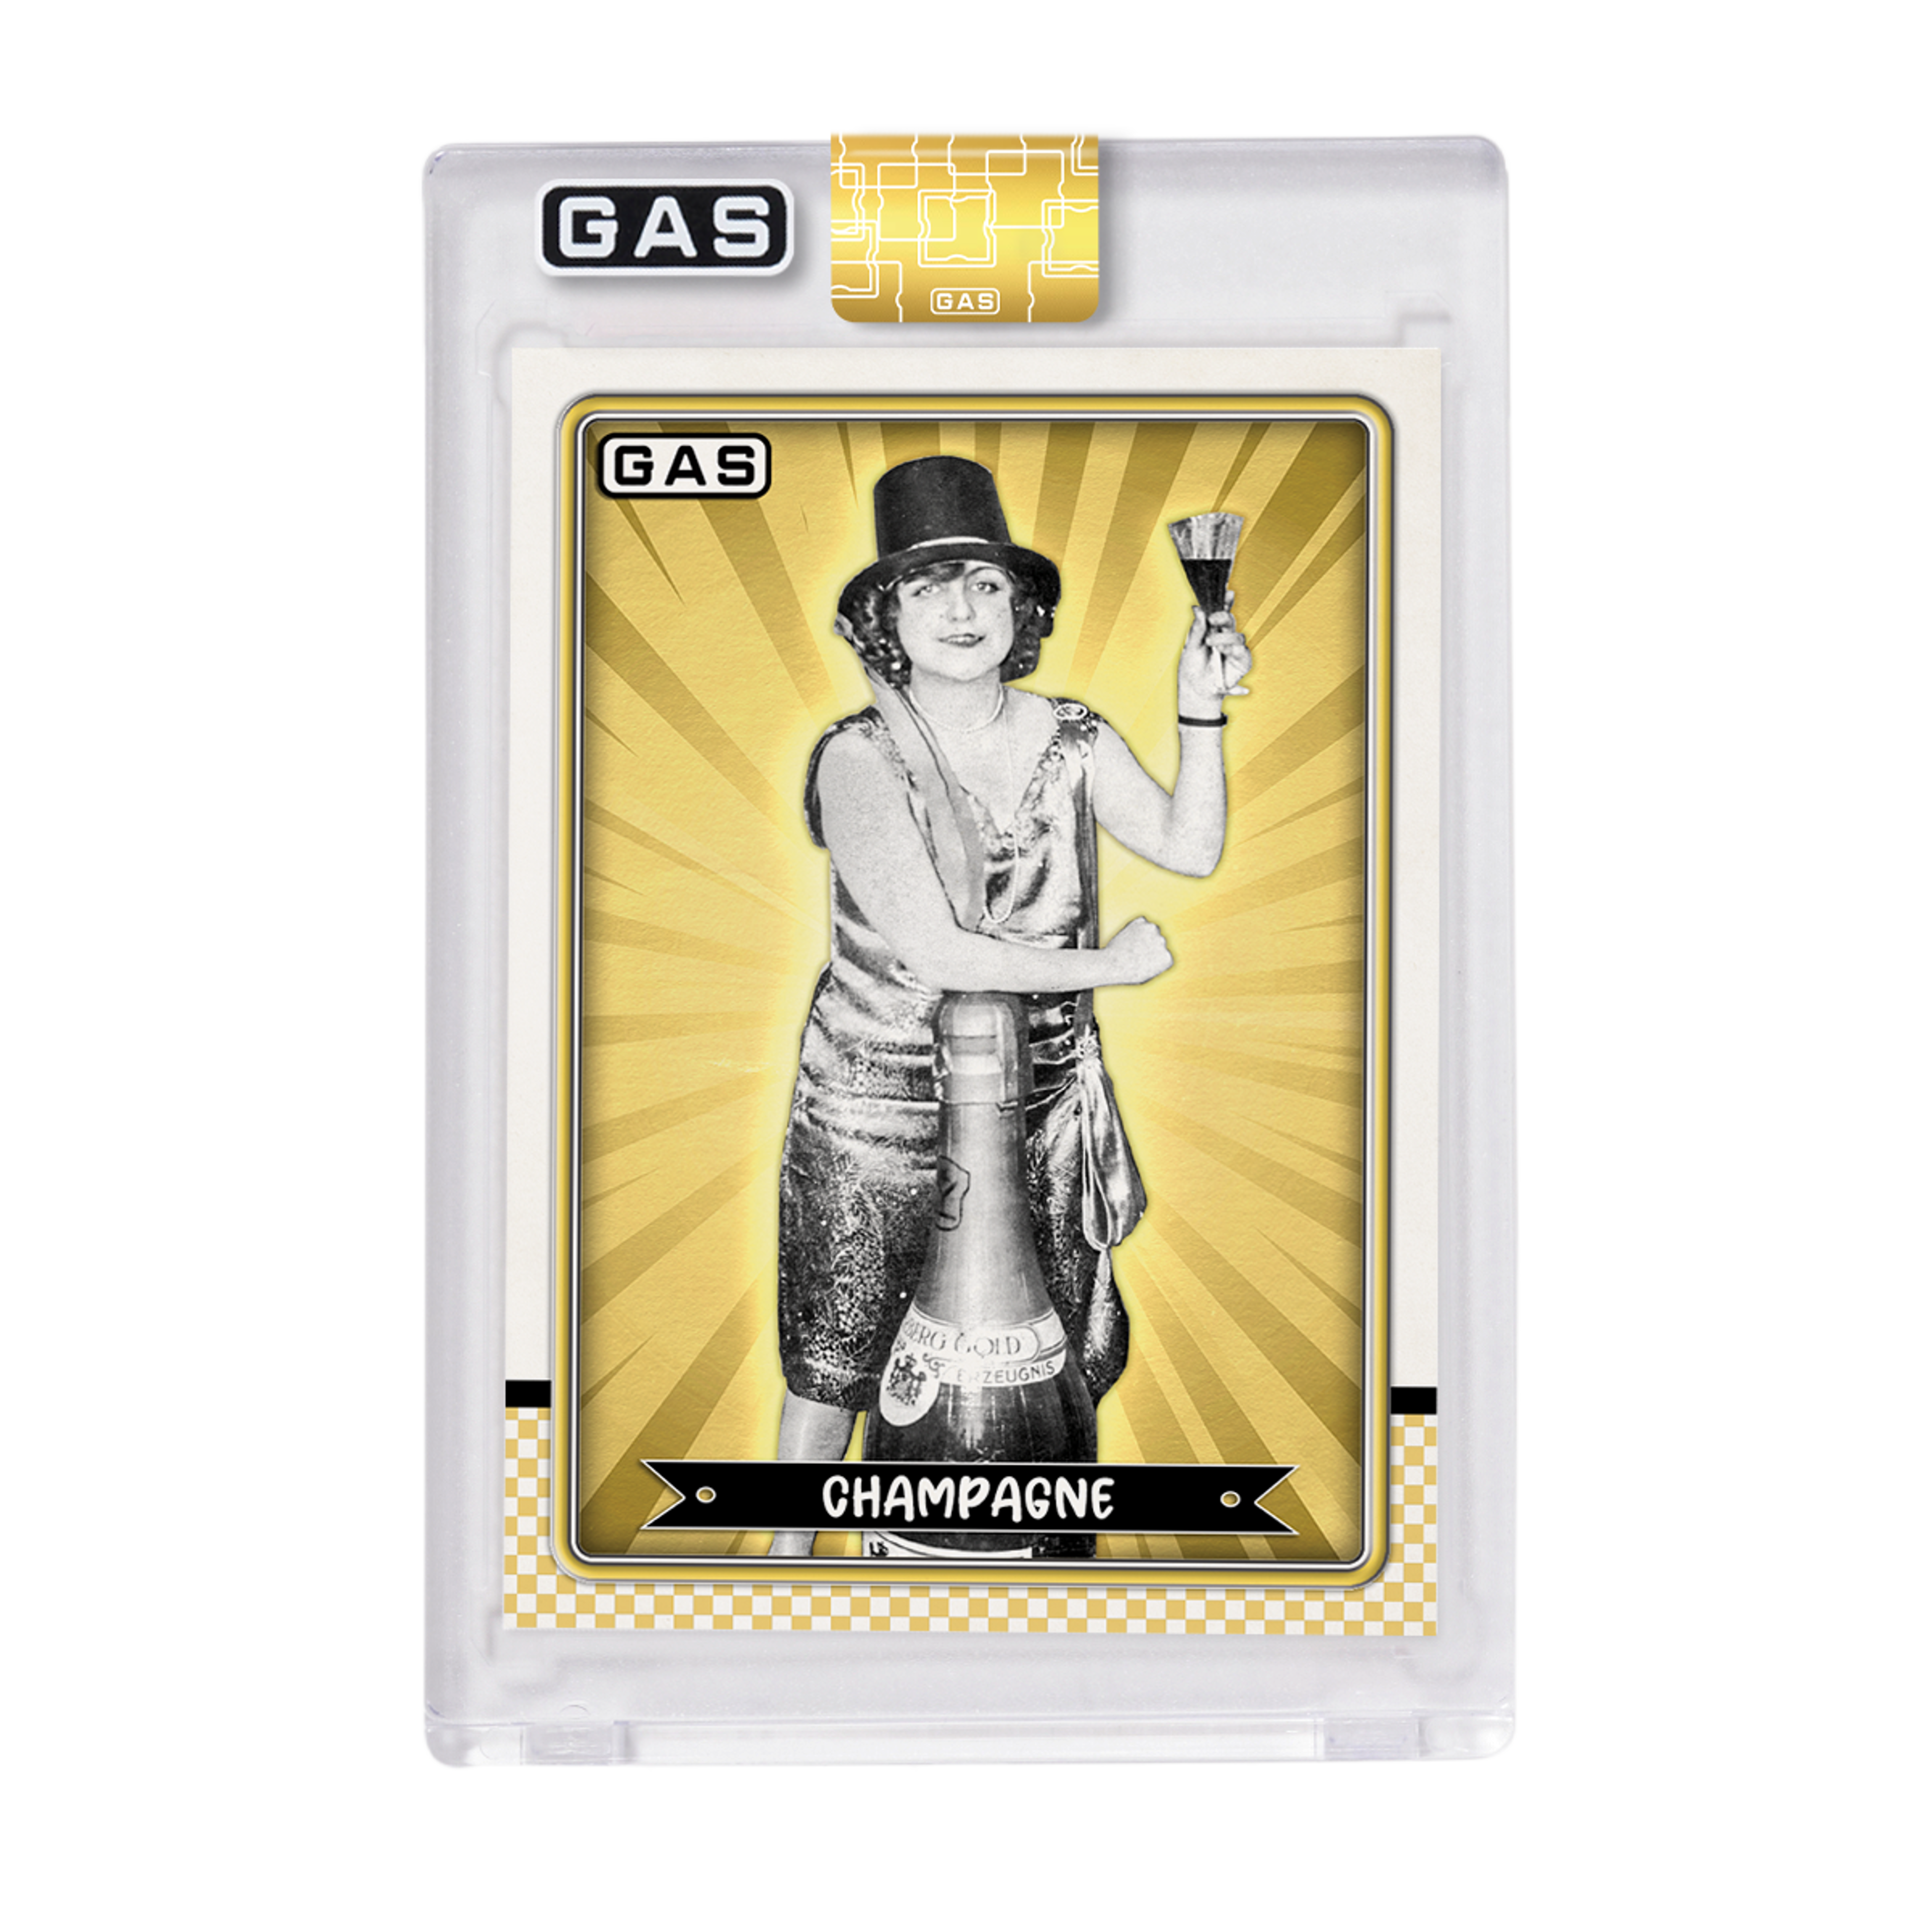 GAS-tronomy #5 Champagne Short Print Trading Card #’d to 15